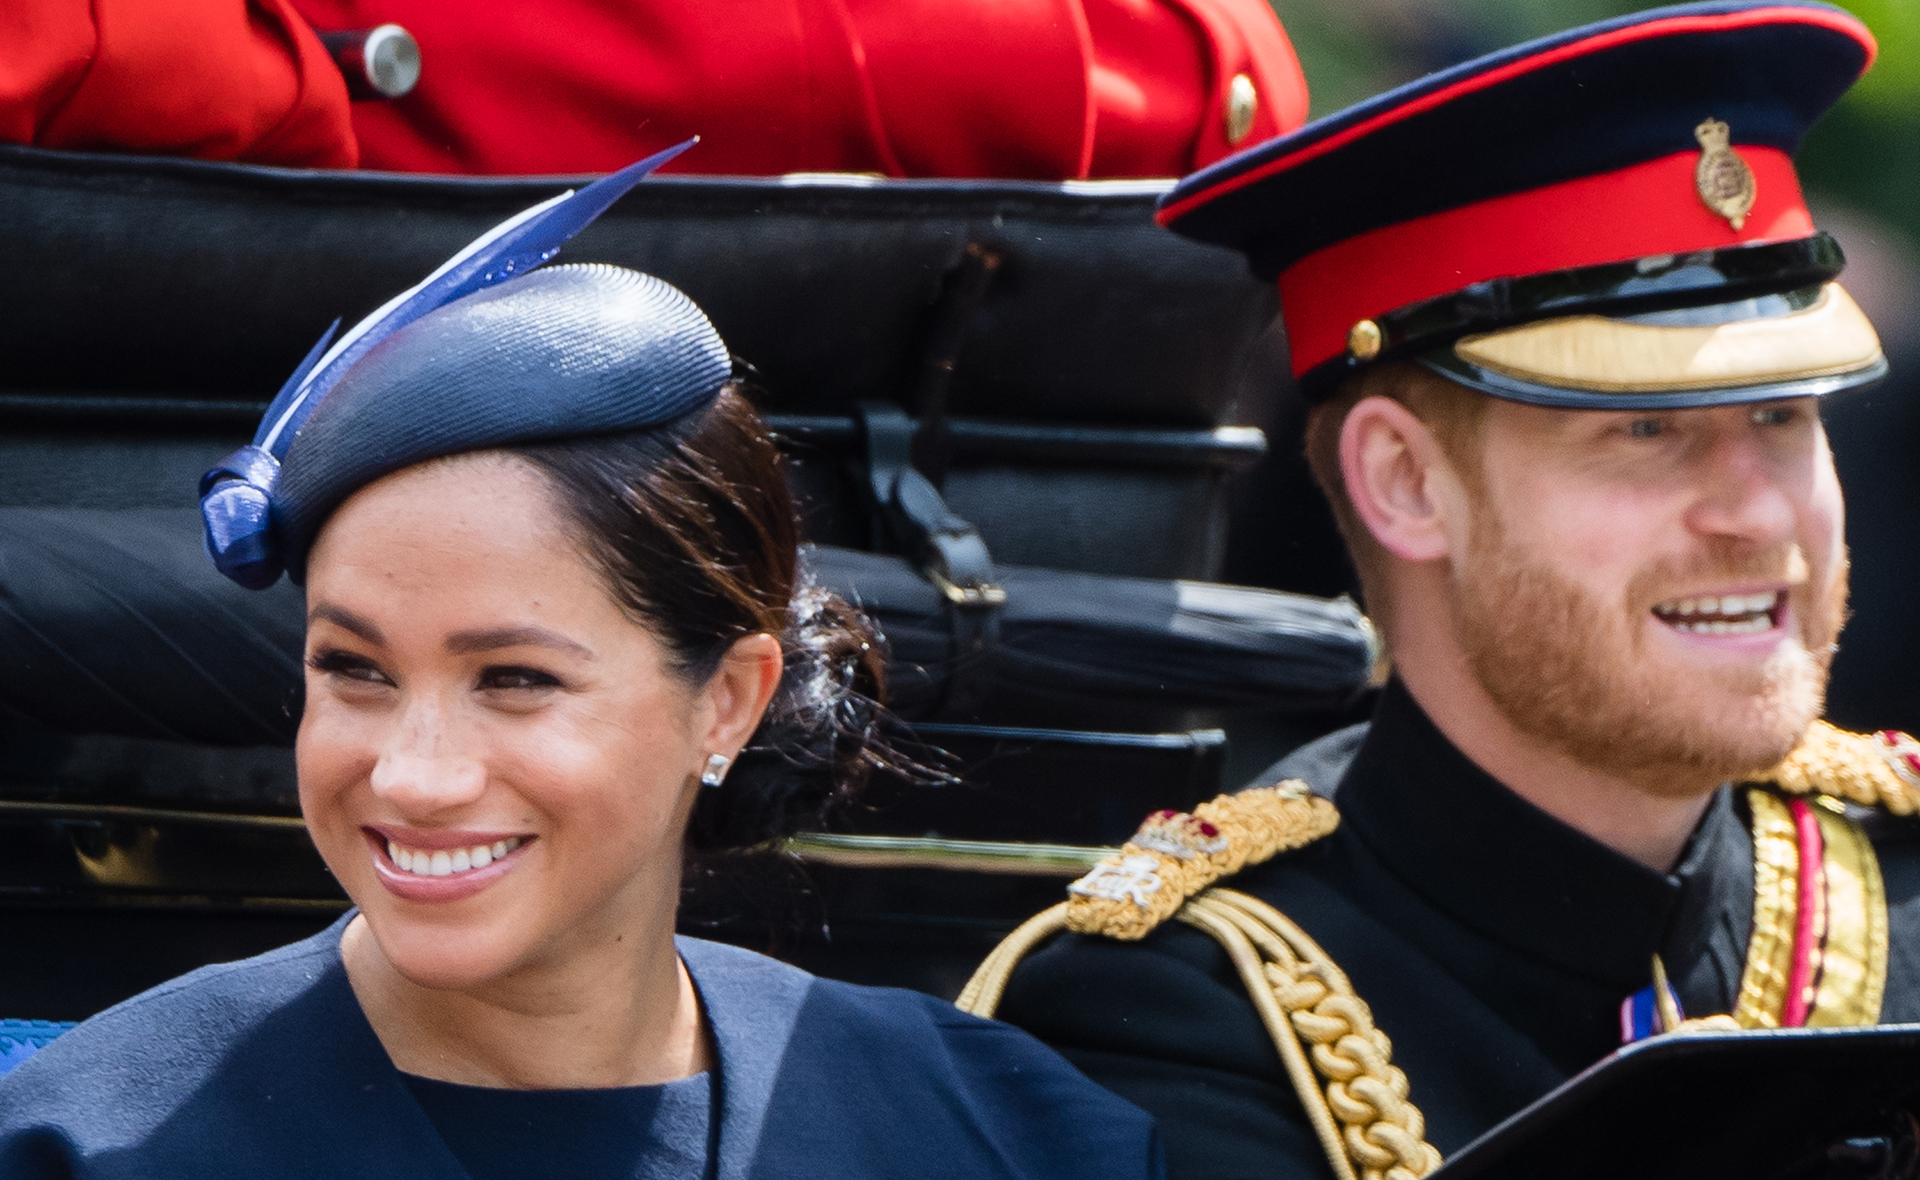 Prince Harry and Meghan, Duchess of Sussex land in the UK for the Queen’s Platinum Jubilee weekend: Here’s what events they’ll attend